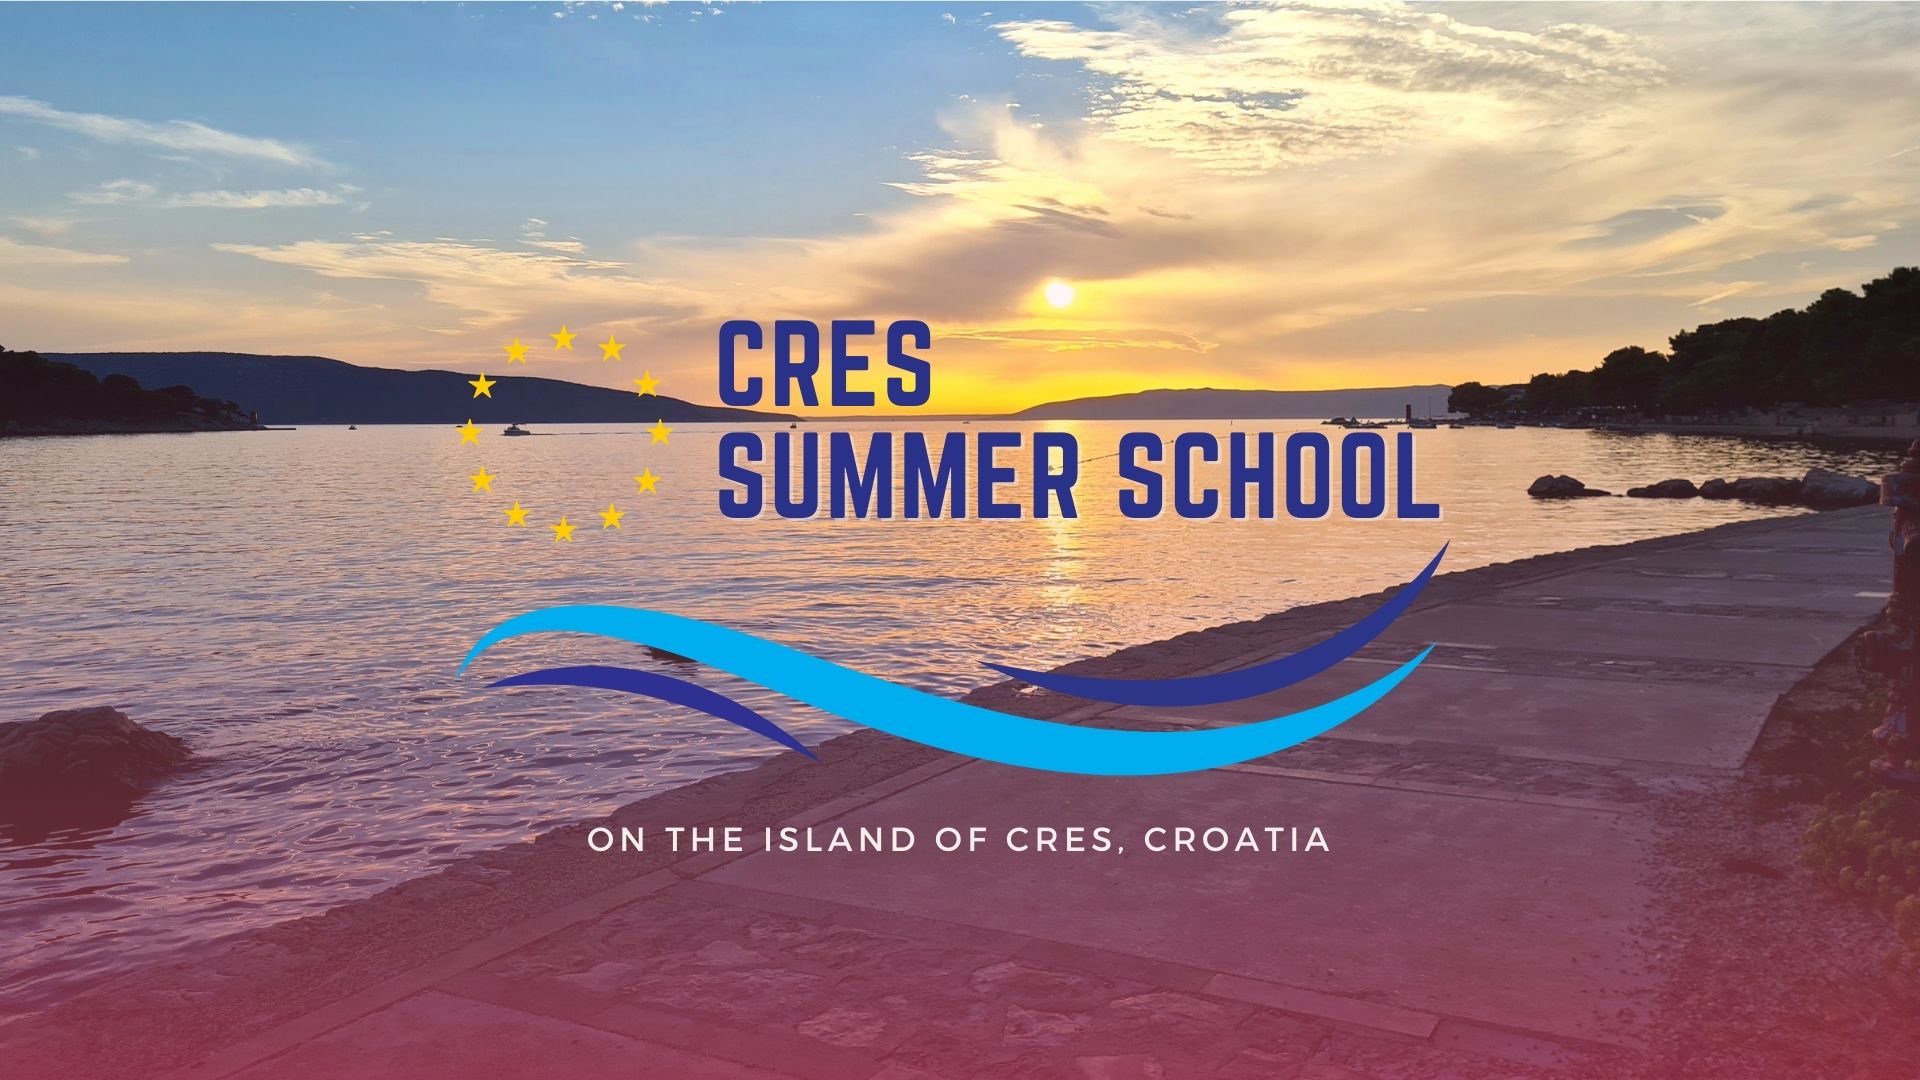 View of a sunset in a bay in Cres (Croatia), with the logo "Cres Summerschool, On the island of Cres, Croatia"